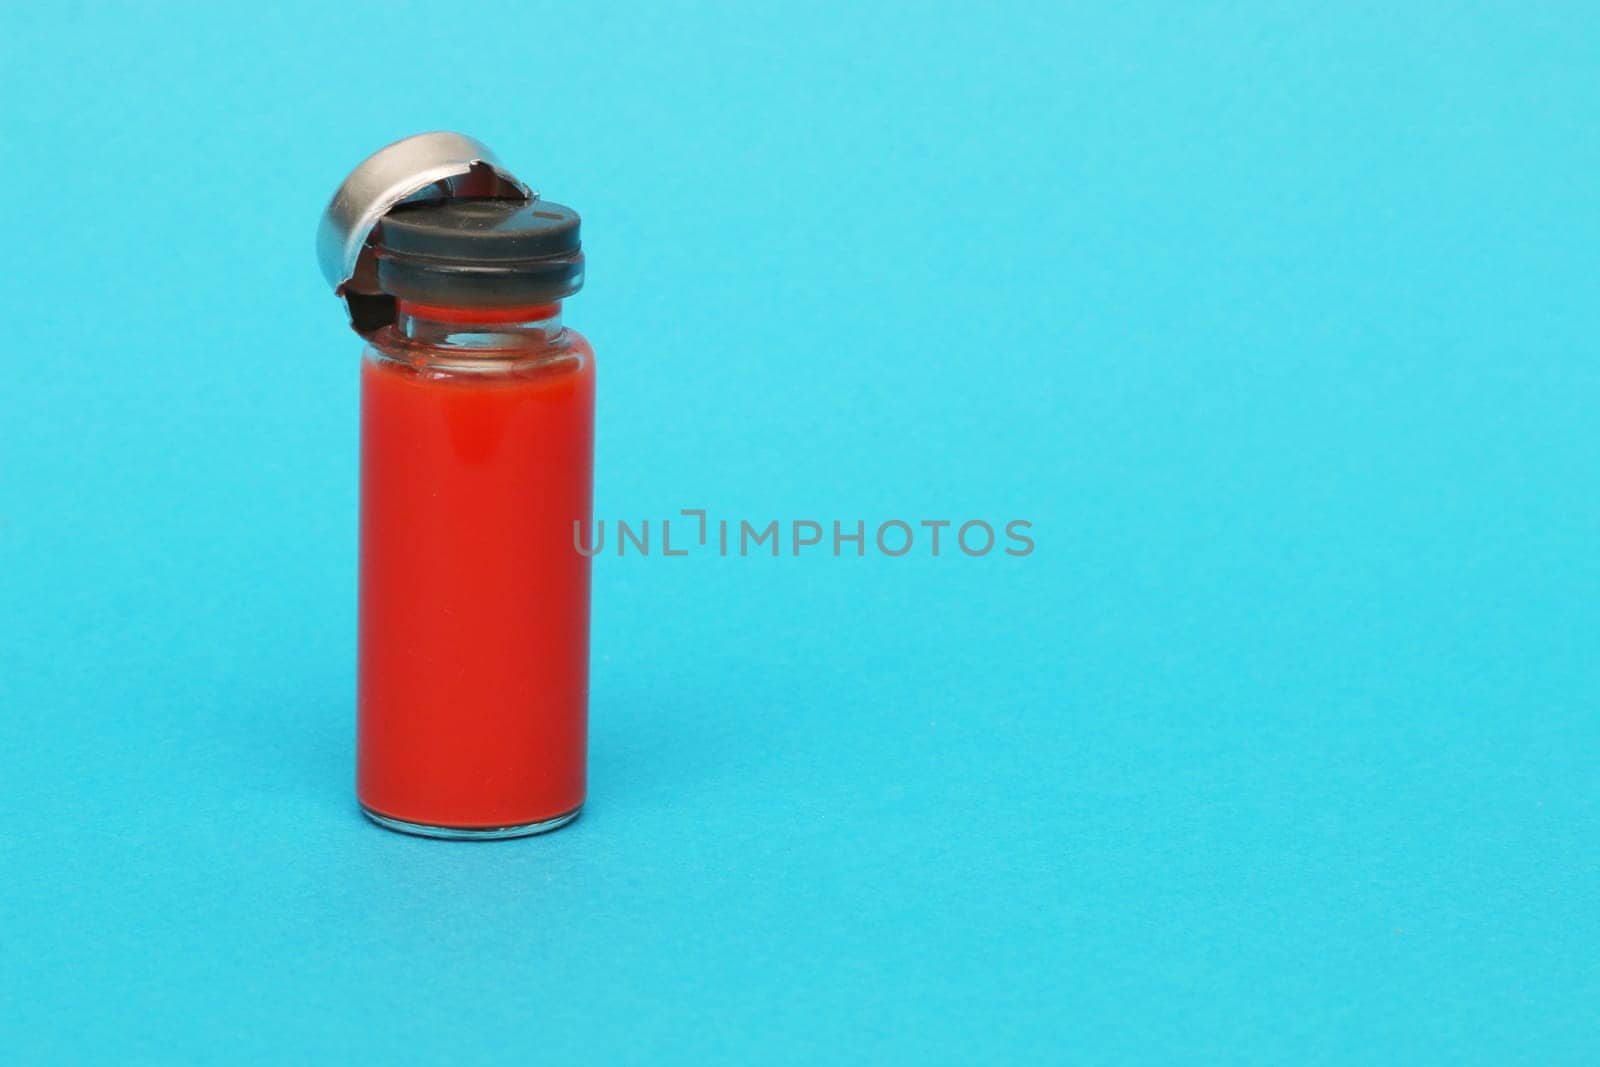 Glass medical bottle with a metal cap filled with blood. Glass bottle with red liquid on a blue paper background.